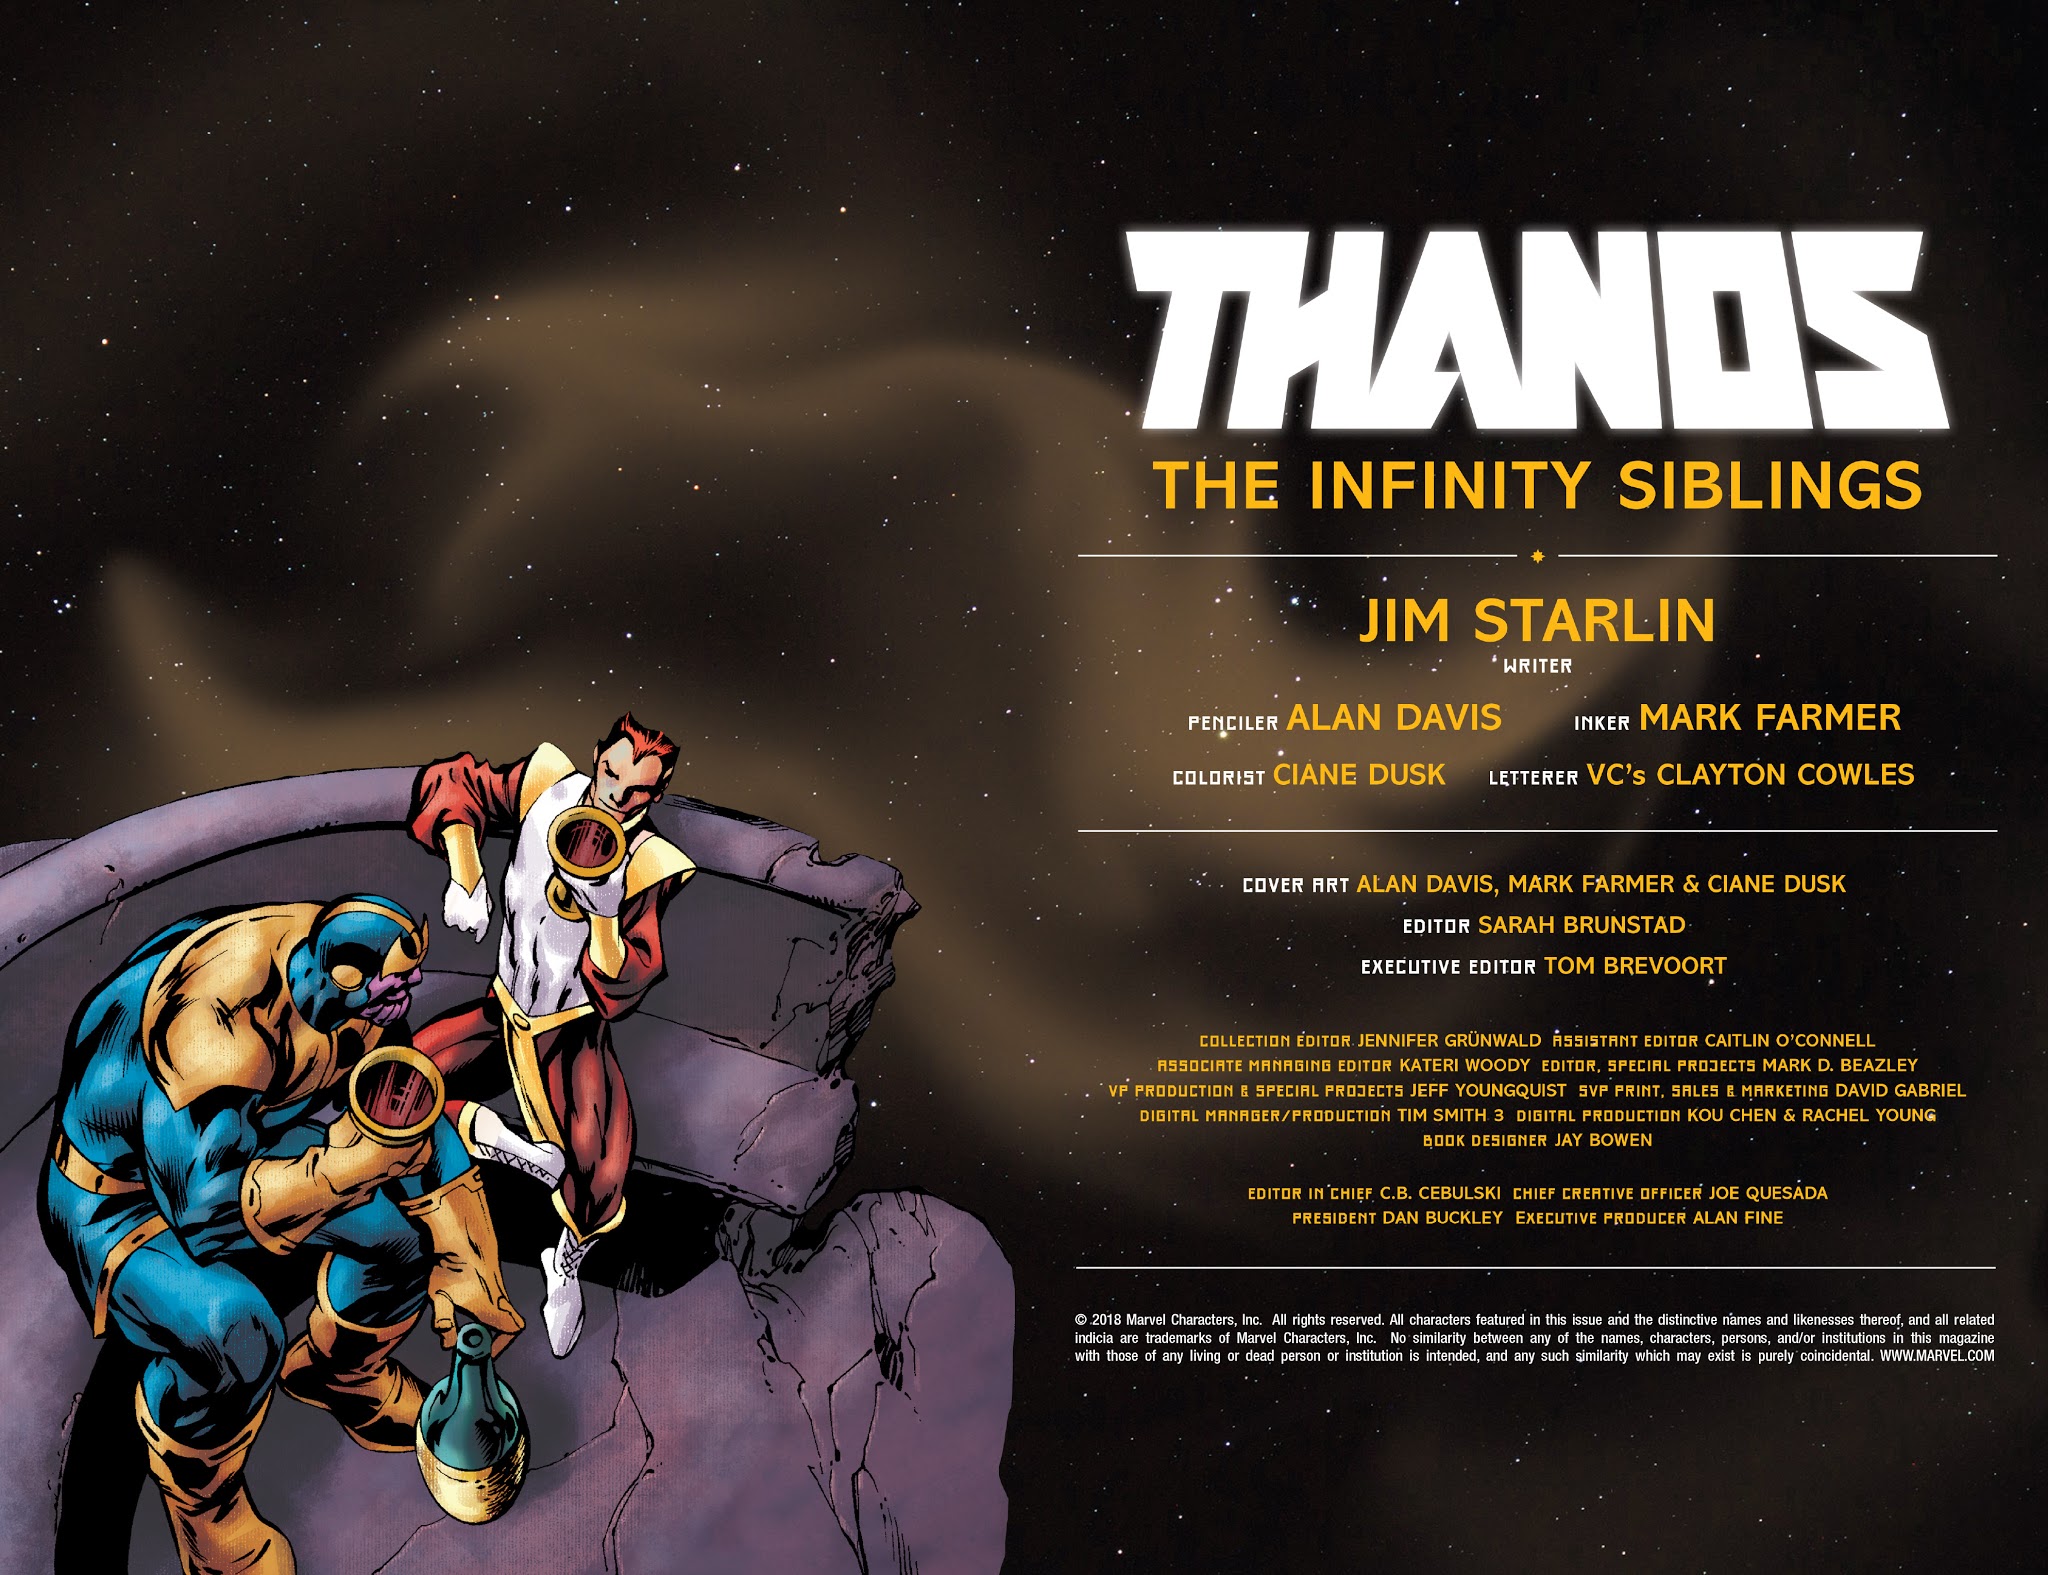 Read online Thanos: The Infinity Siblings comic -  Issue # TPB - 3